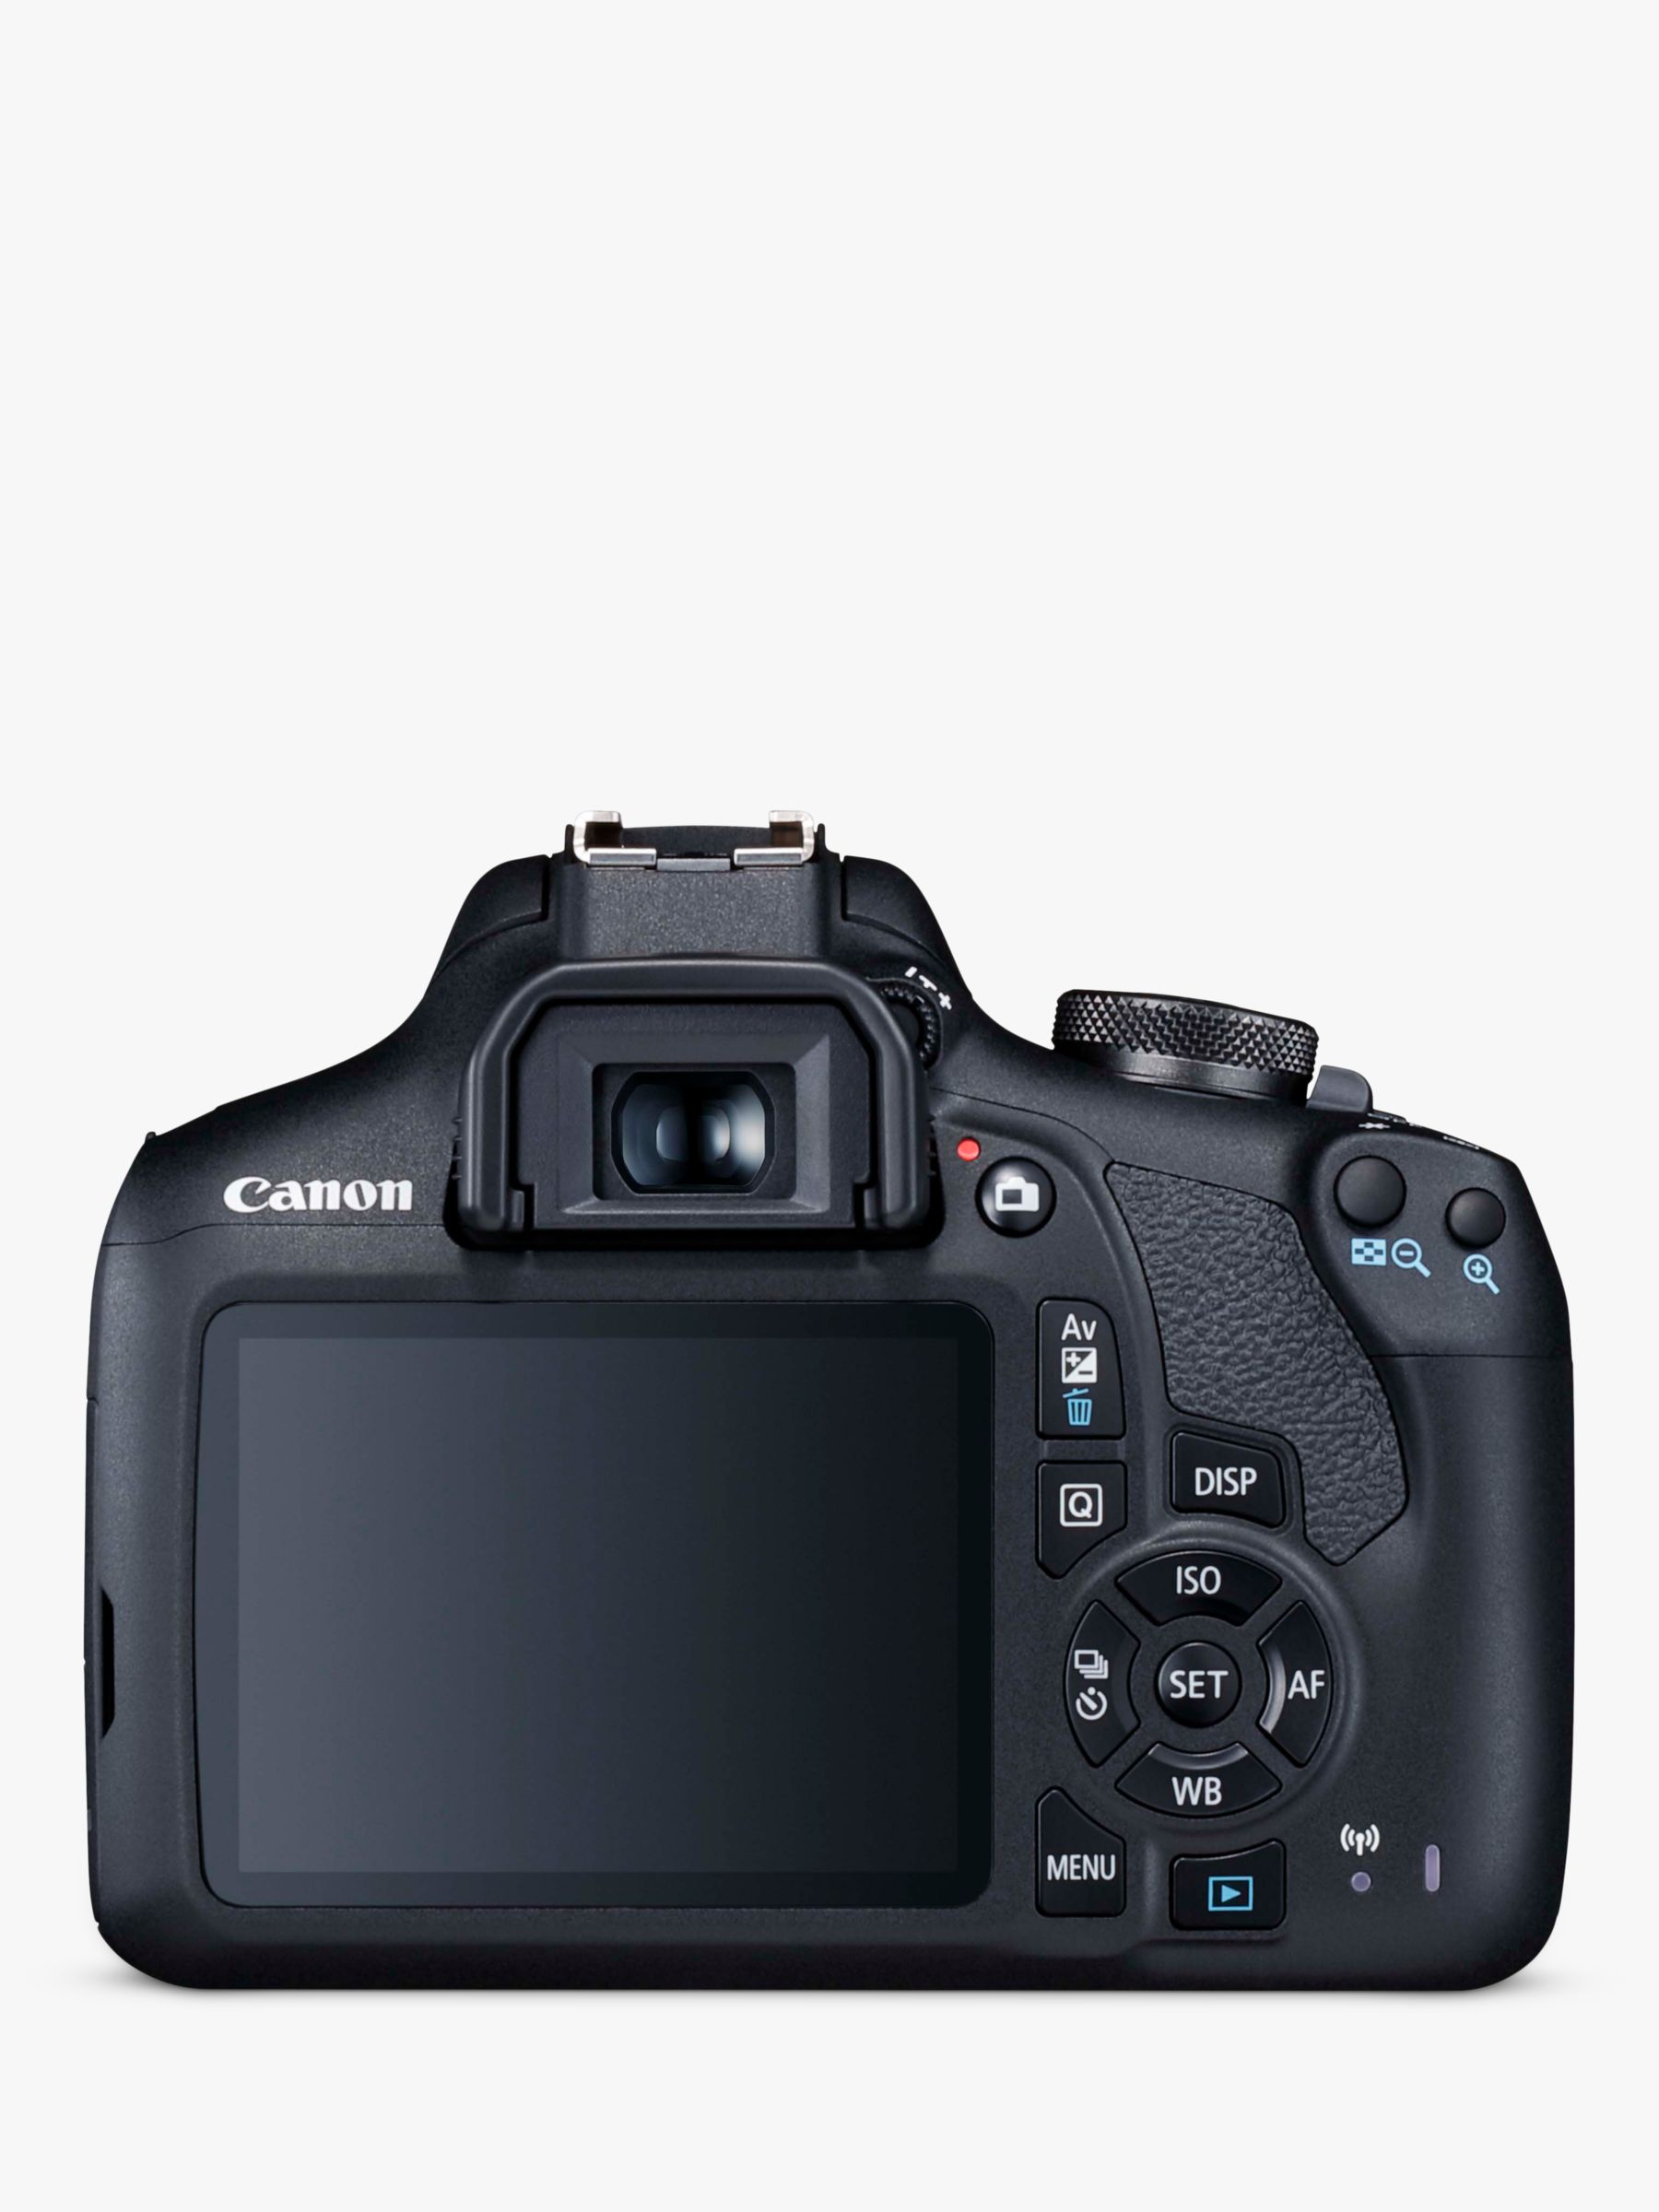 Canon EOS 2000D Digital SLR Camera with 18-55mm Lens & 50mm Lens, 1080p  Full HD, 24.1MP, Wi-Fi, NFC, Optical Viewfinder, 3 LCD Screen, Double Lens  Kit, Black